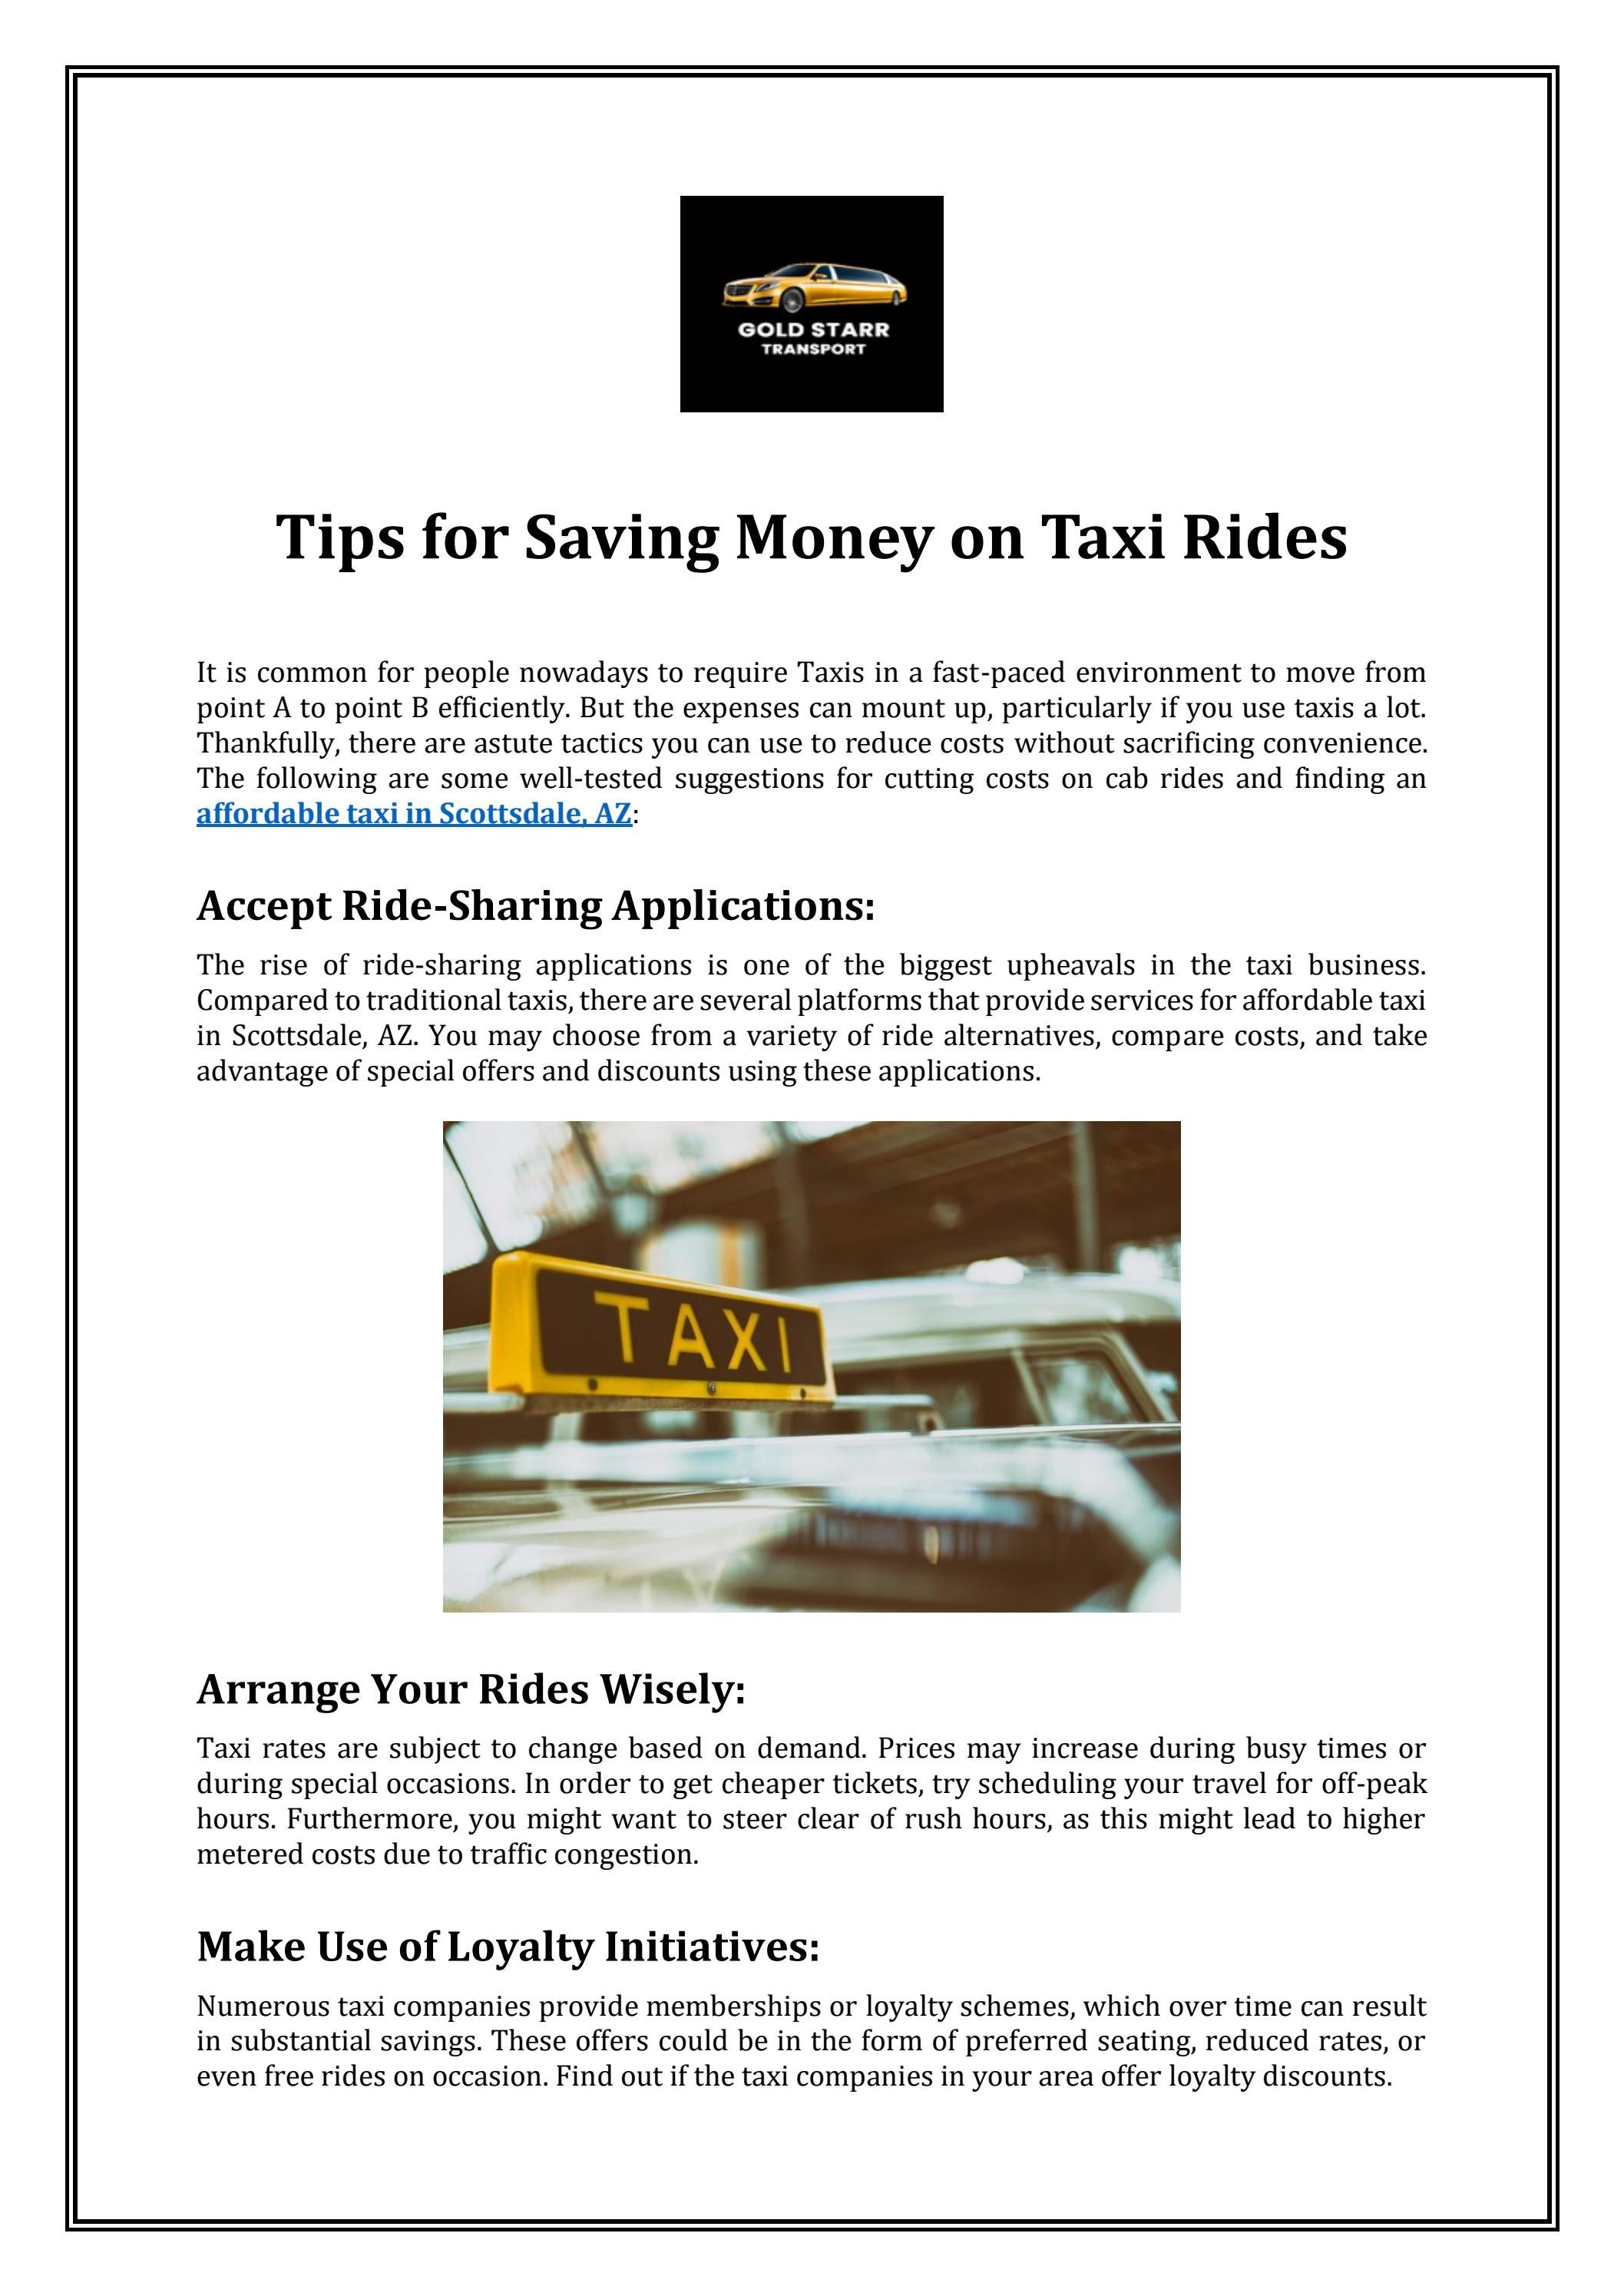 Tips for Saving Money on Taxi Rides